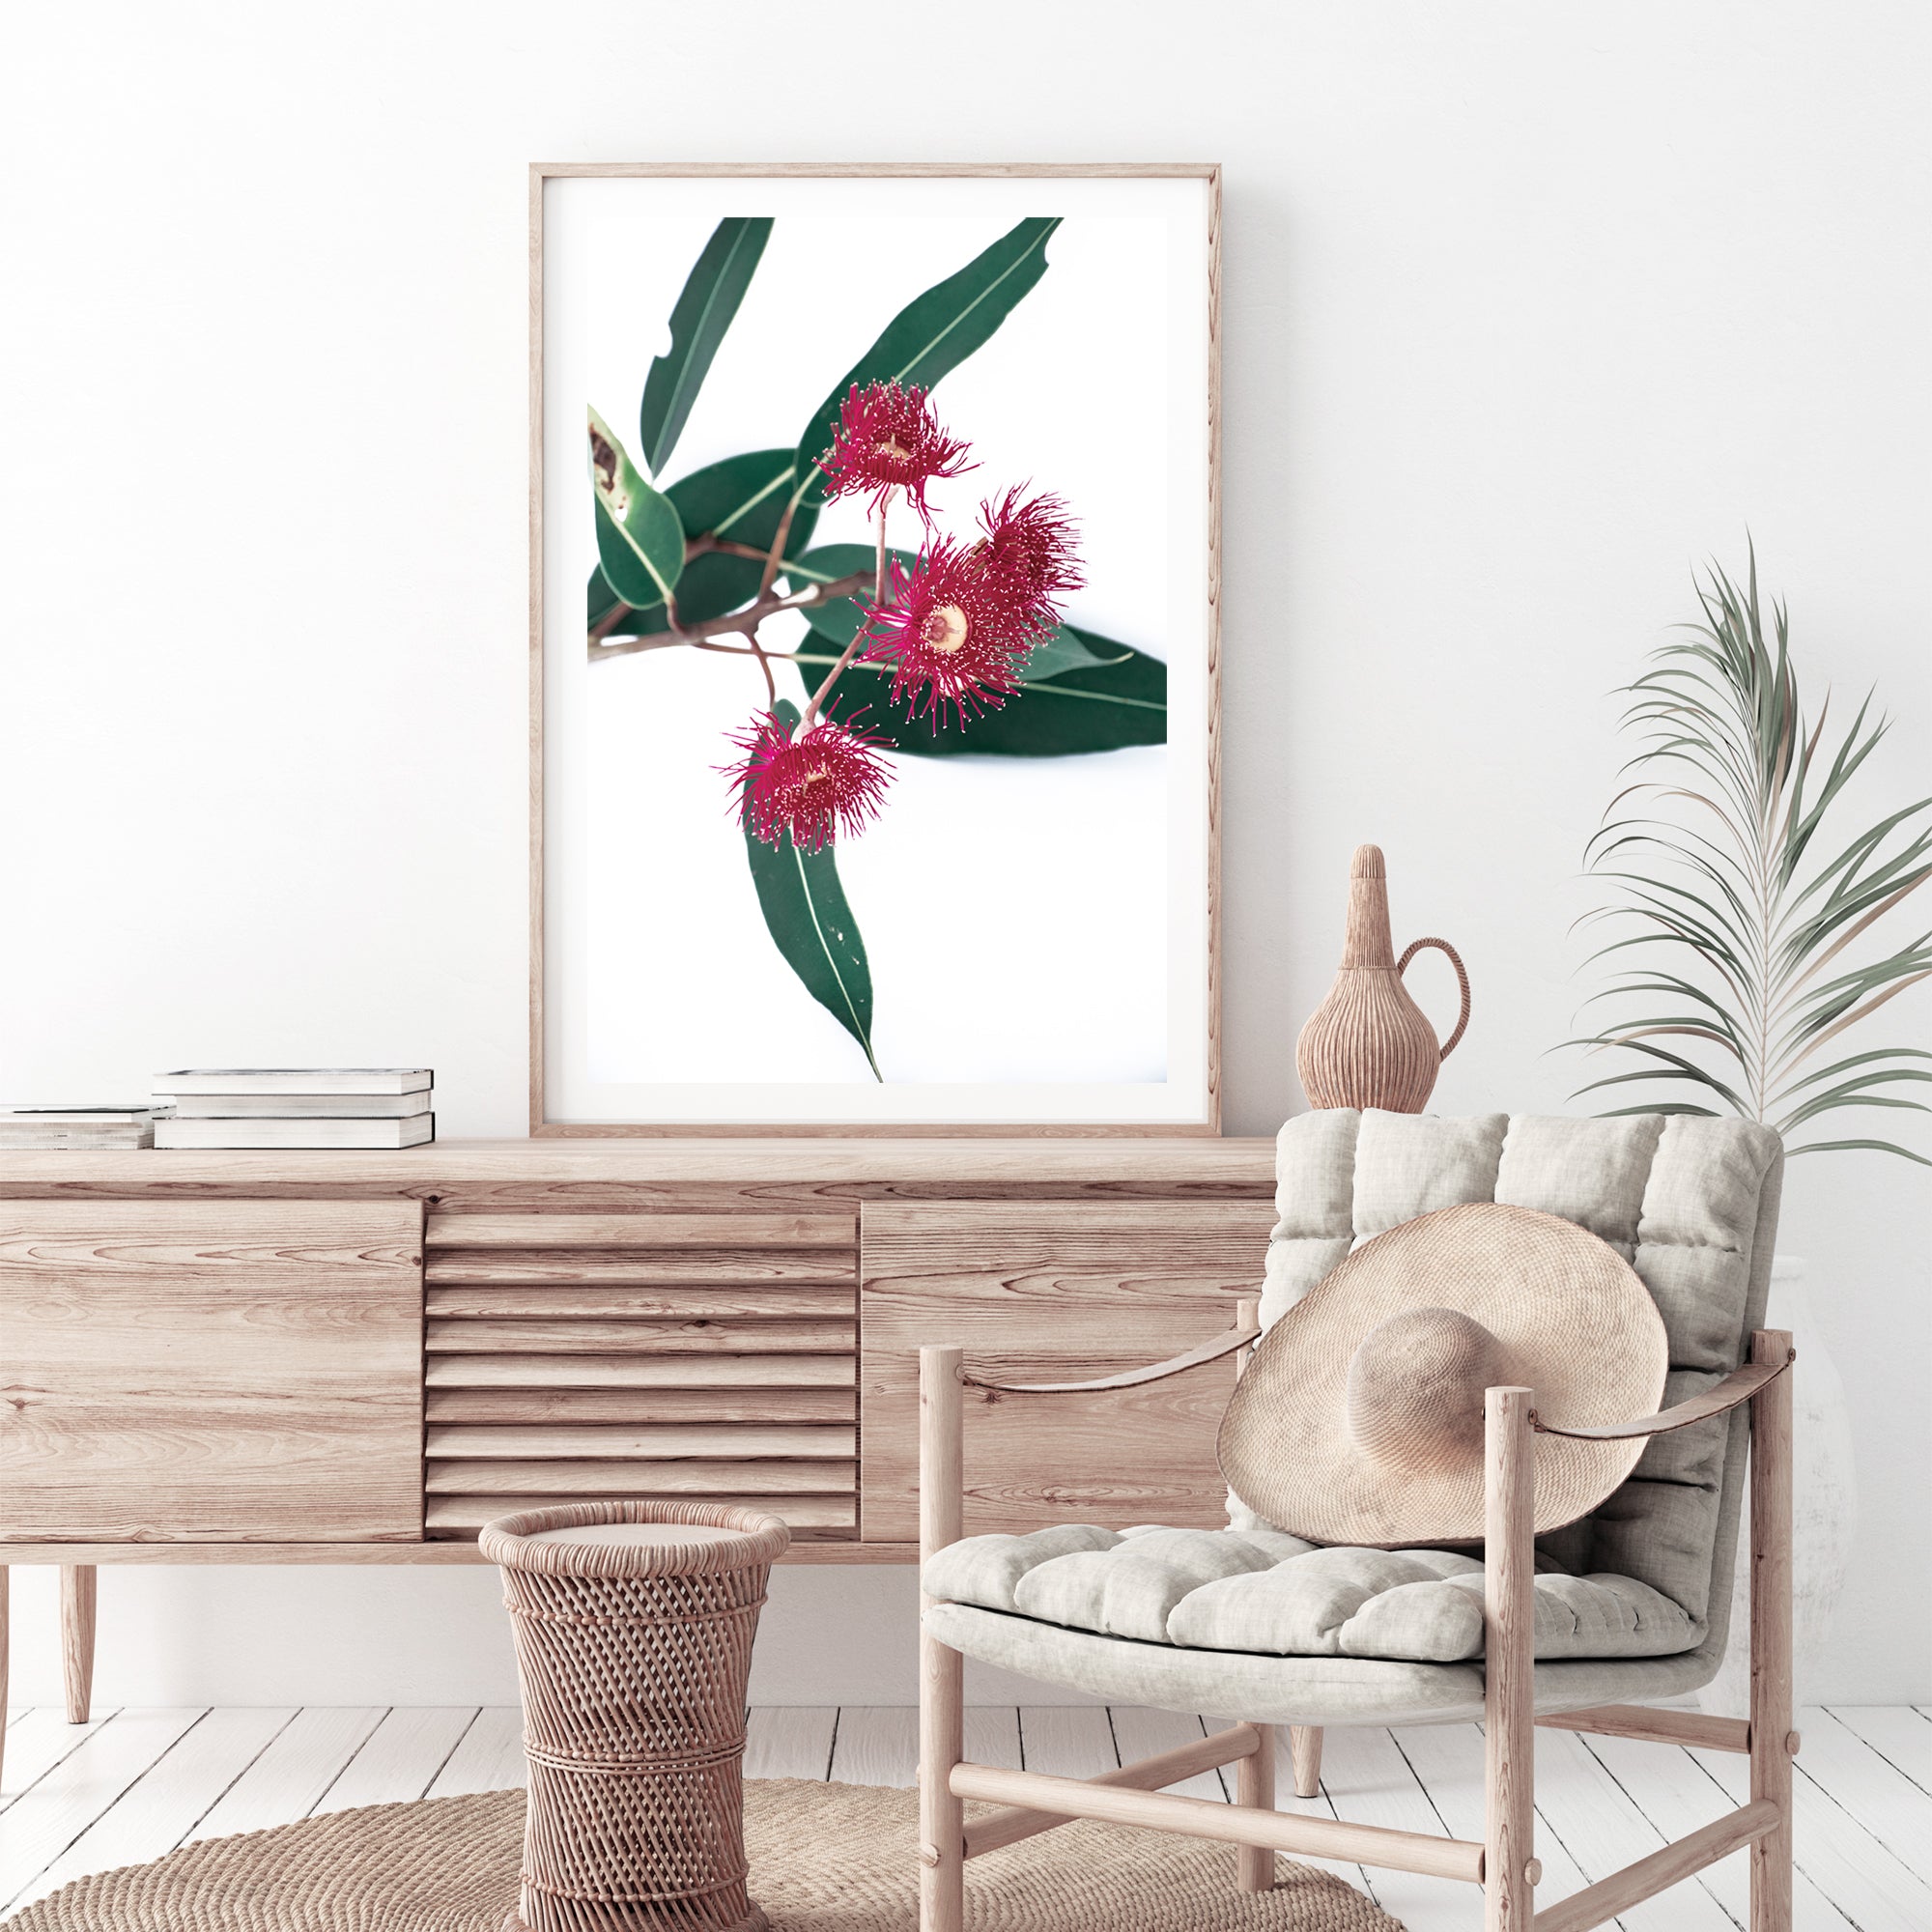 A beautiful floral wall art featuring green eucalyptus leaves and red wild flowers, available in canvas and art prints.